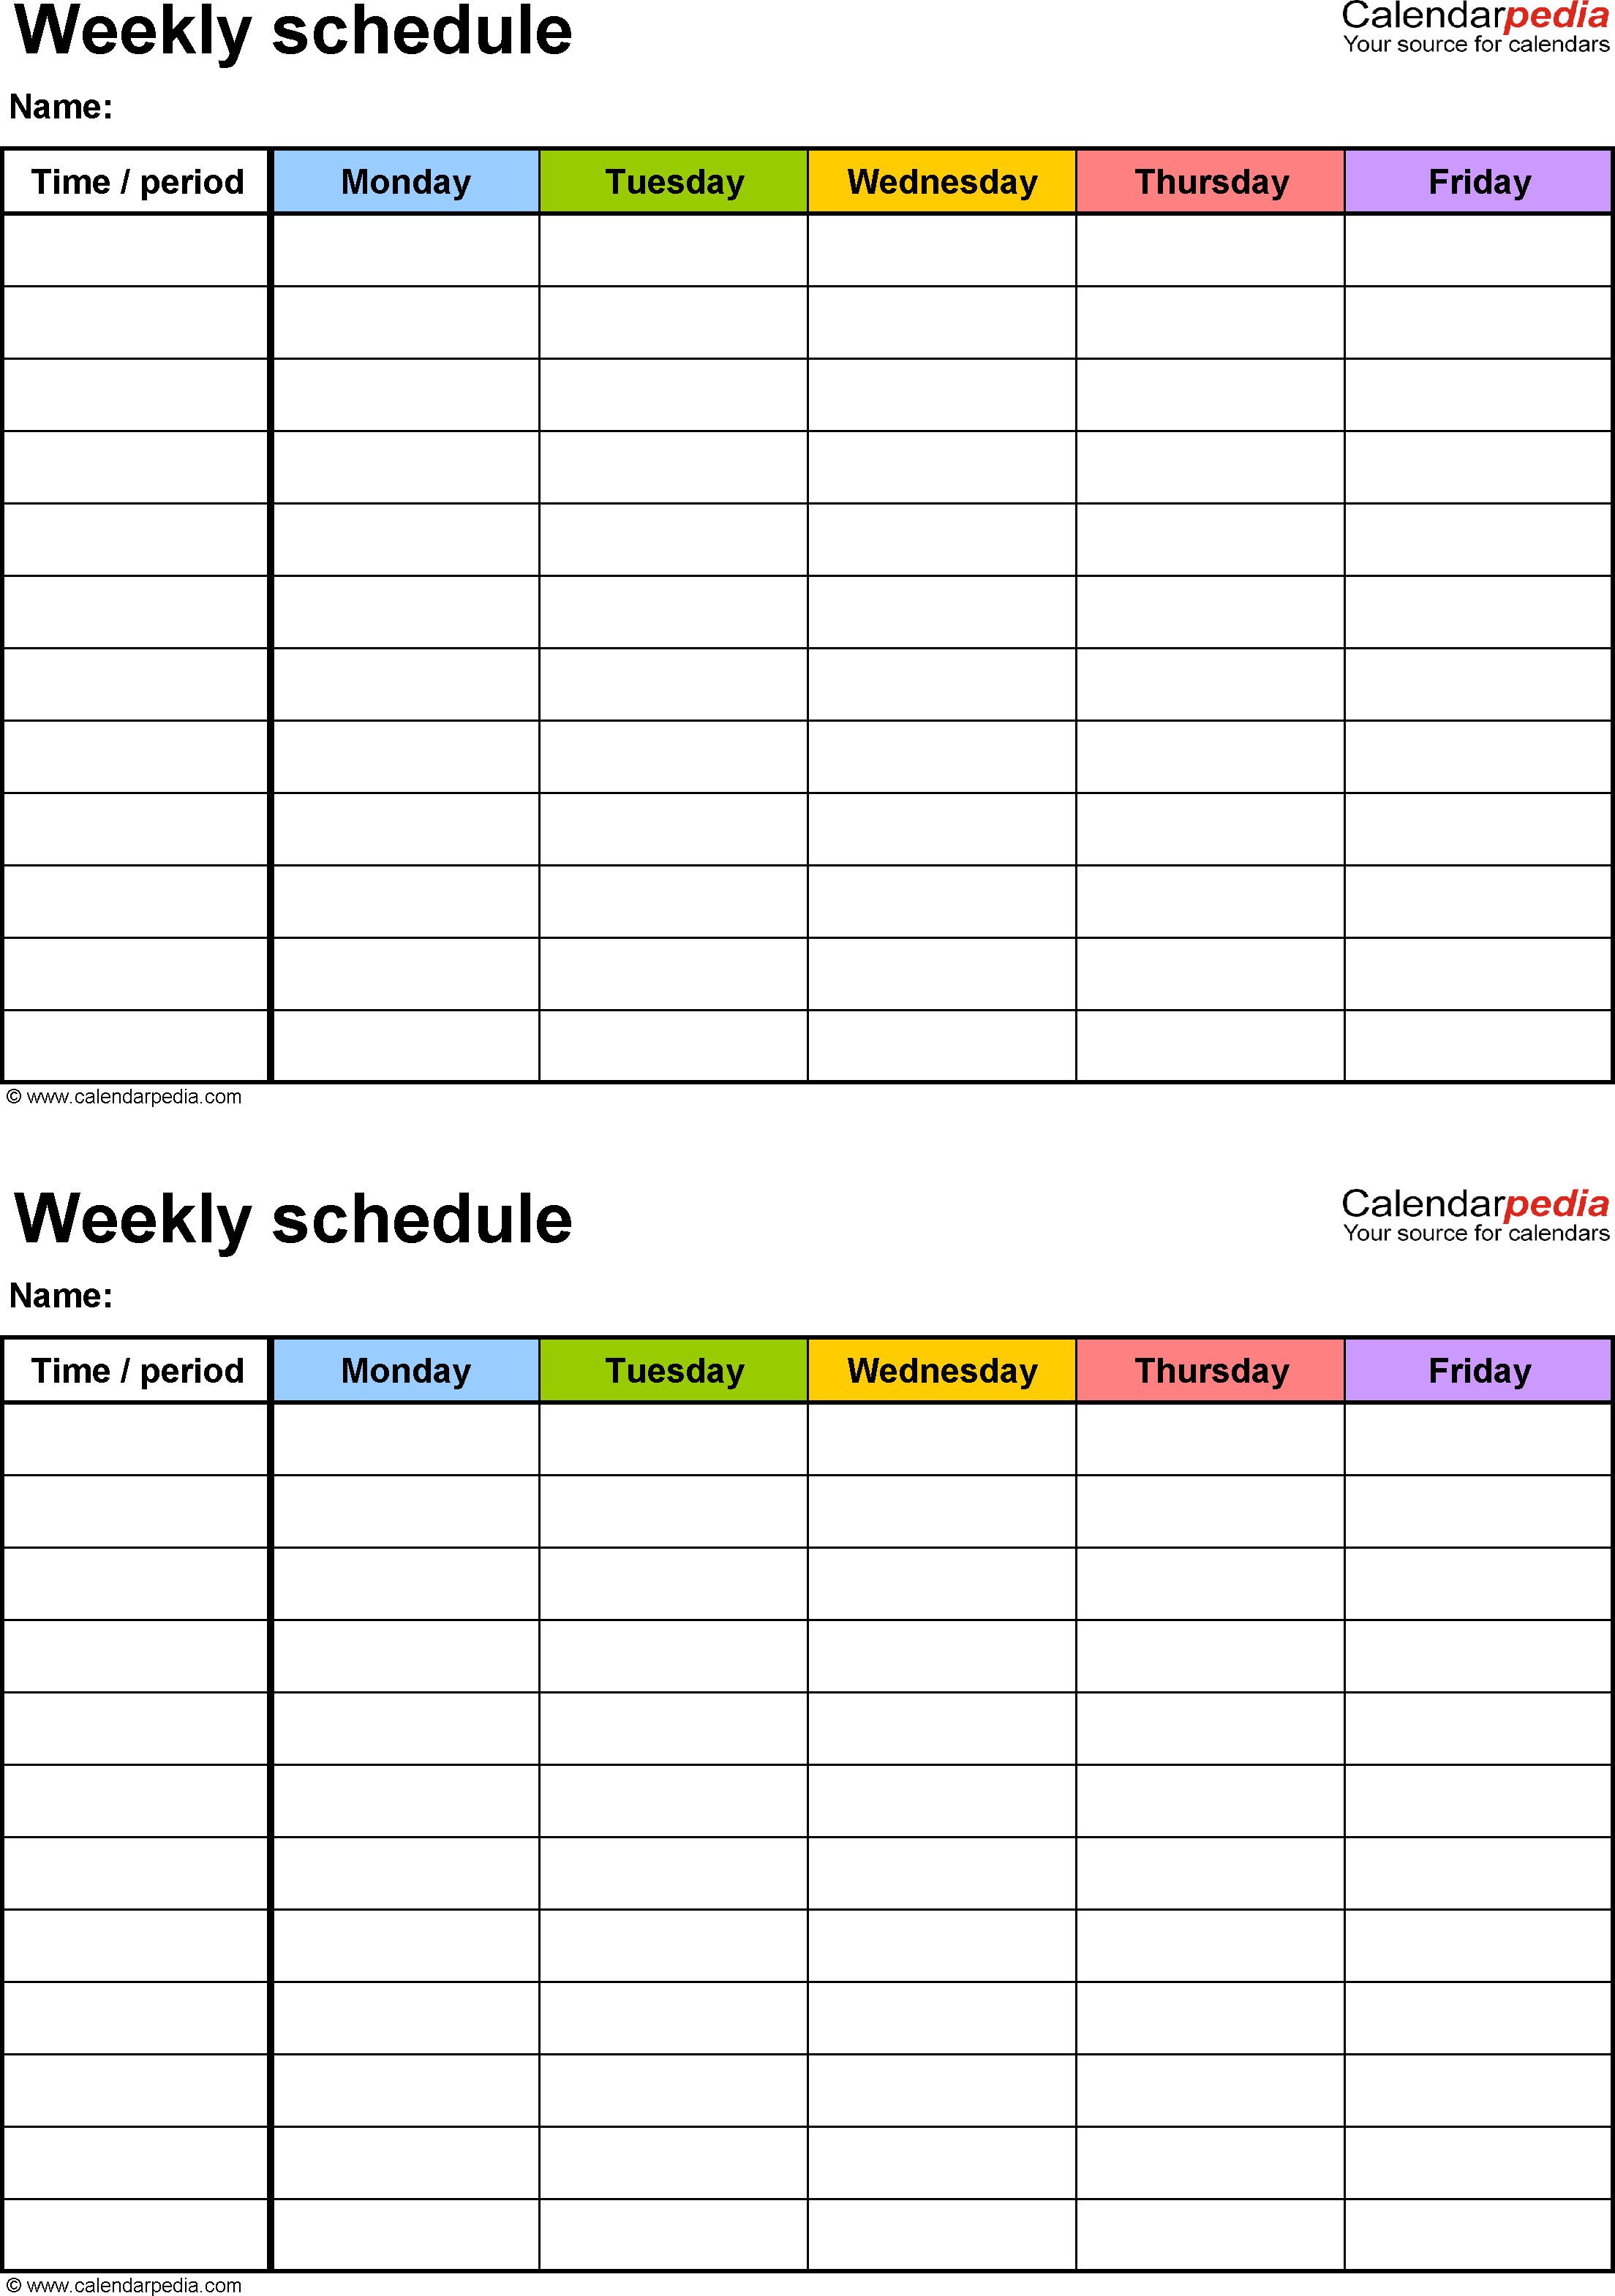 Free Weekly Schedule Templates For Word - 18 Templates - Free Printable School Agenda Templates